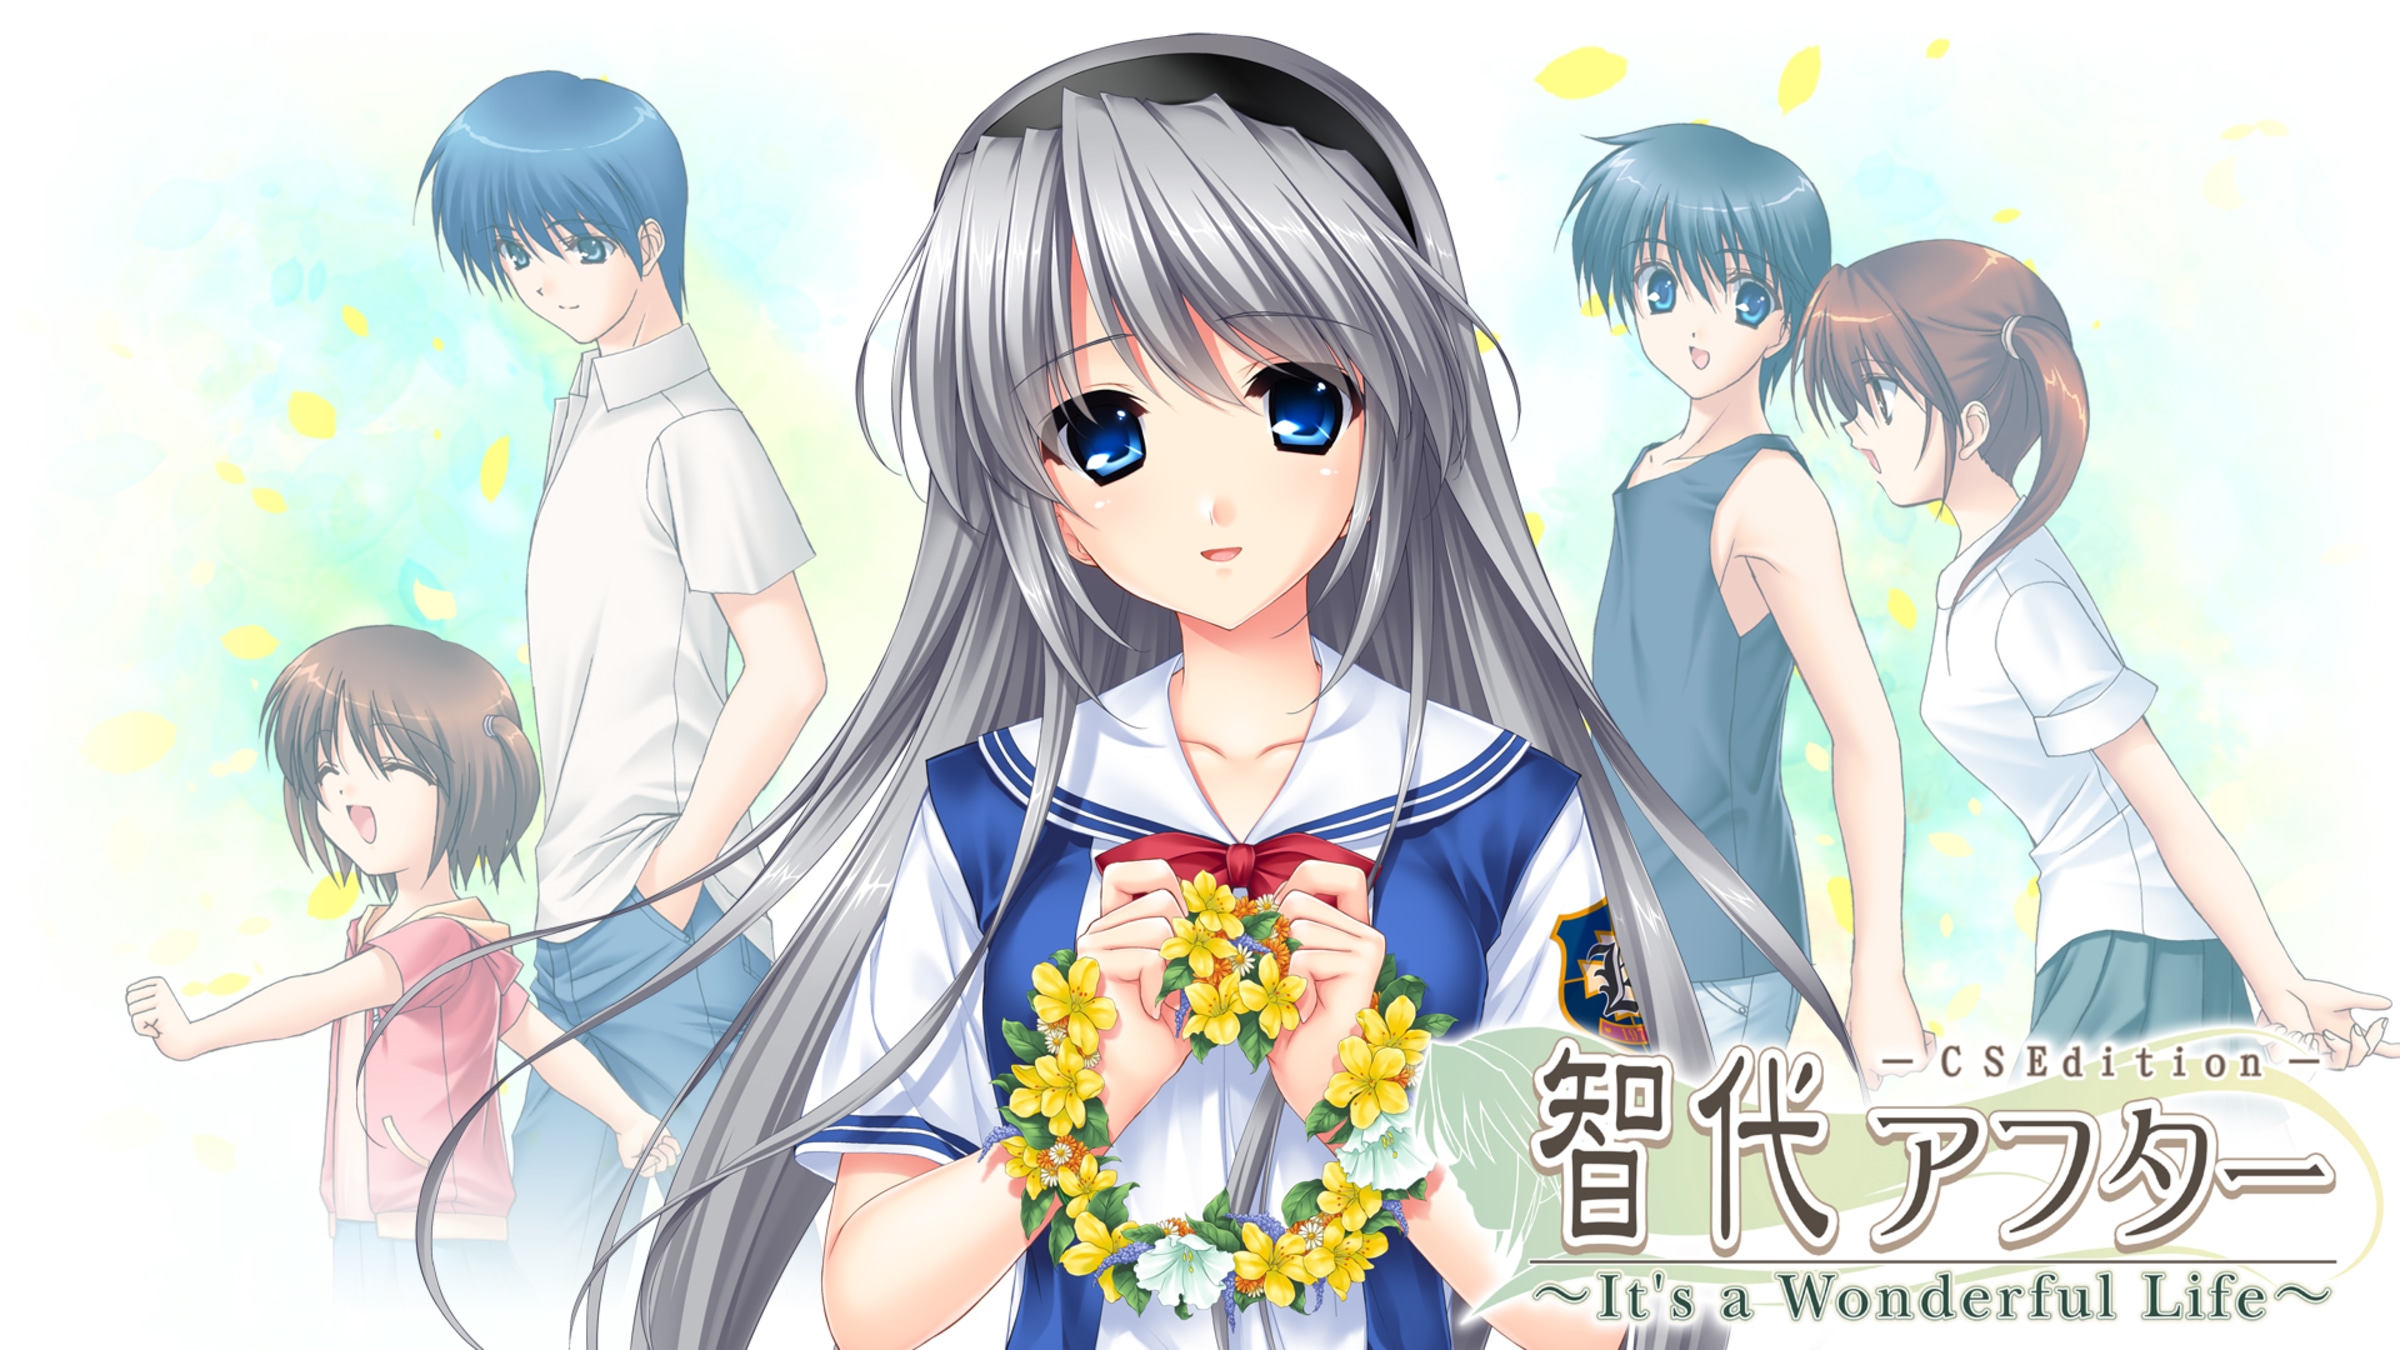 Tomoyo after its a wonderful life